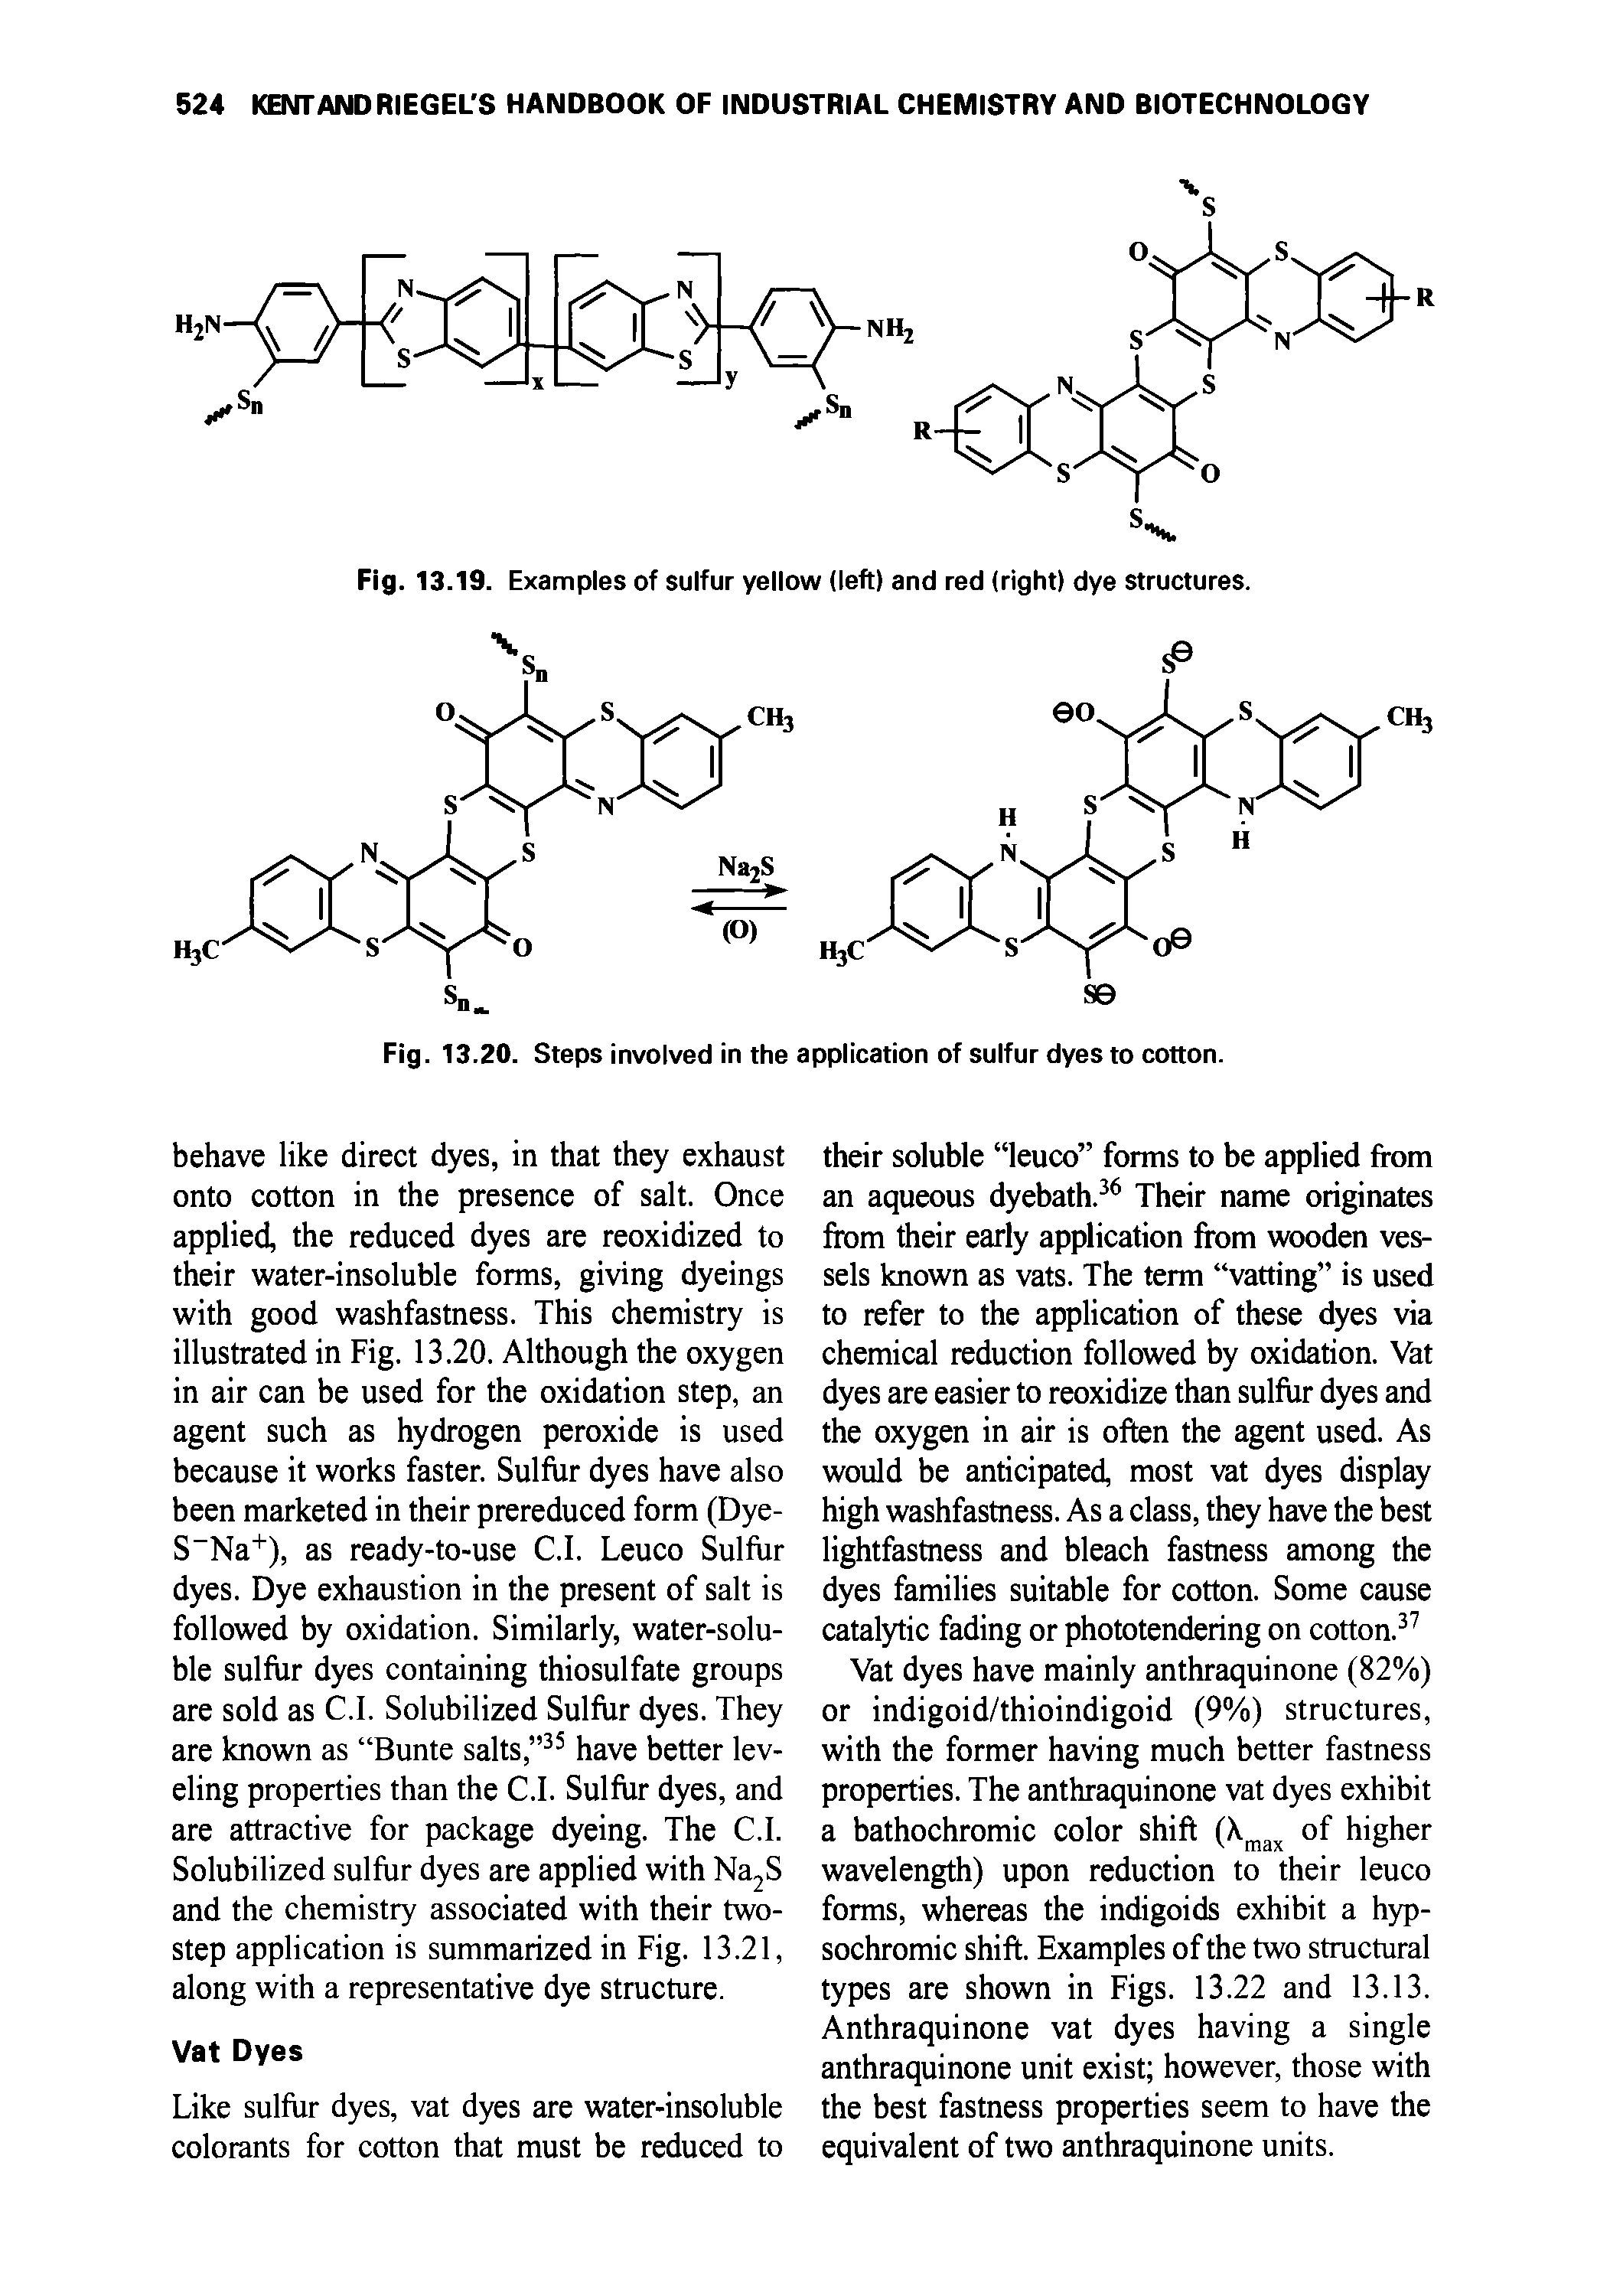 Fig. 13.19. Examples of sulfur yellow (left) and red (right) dye structures.